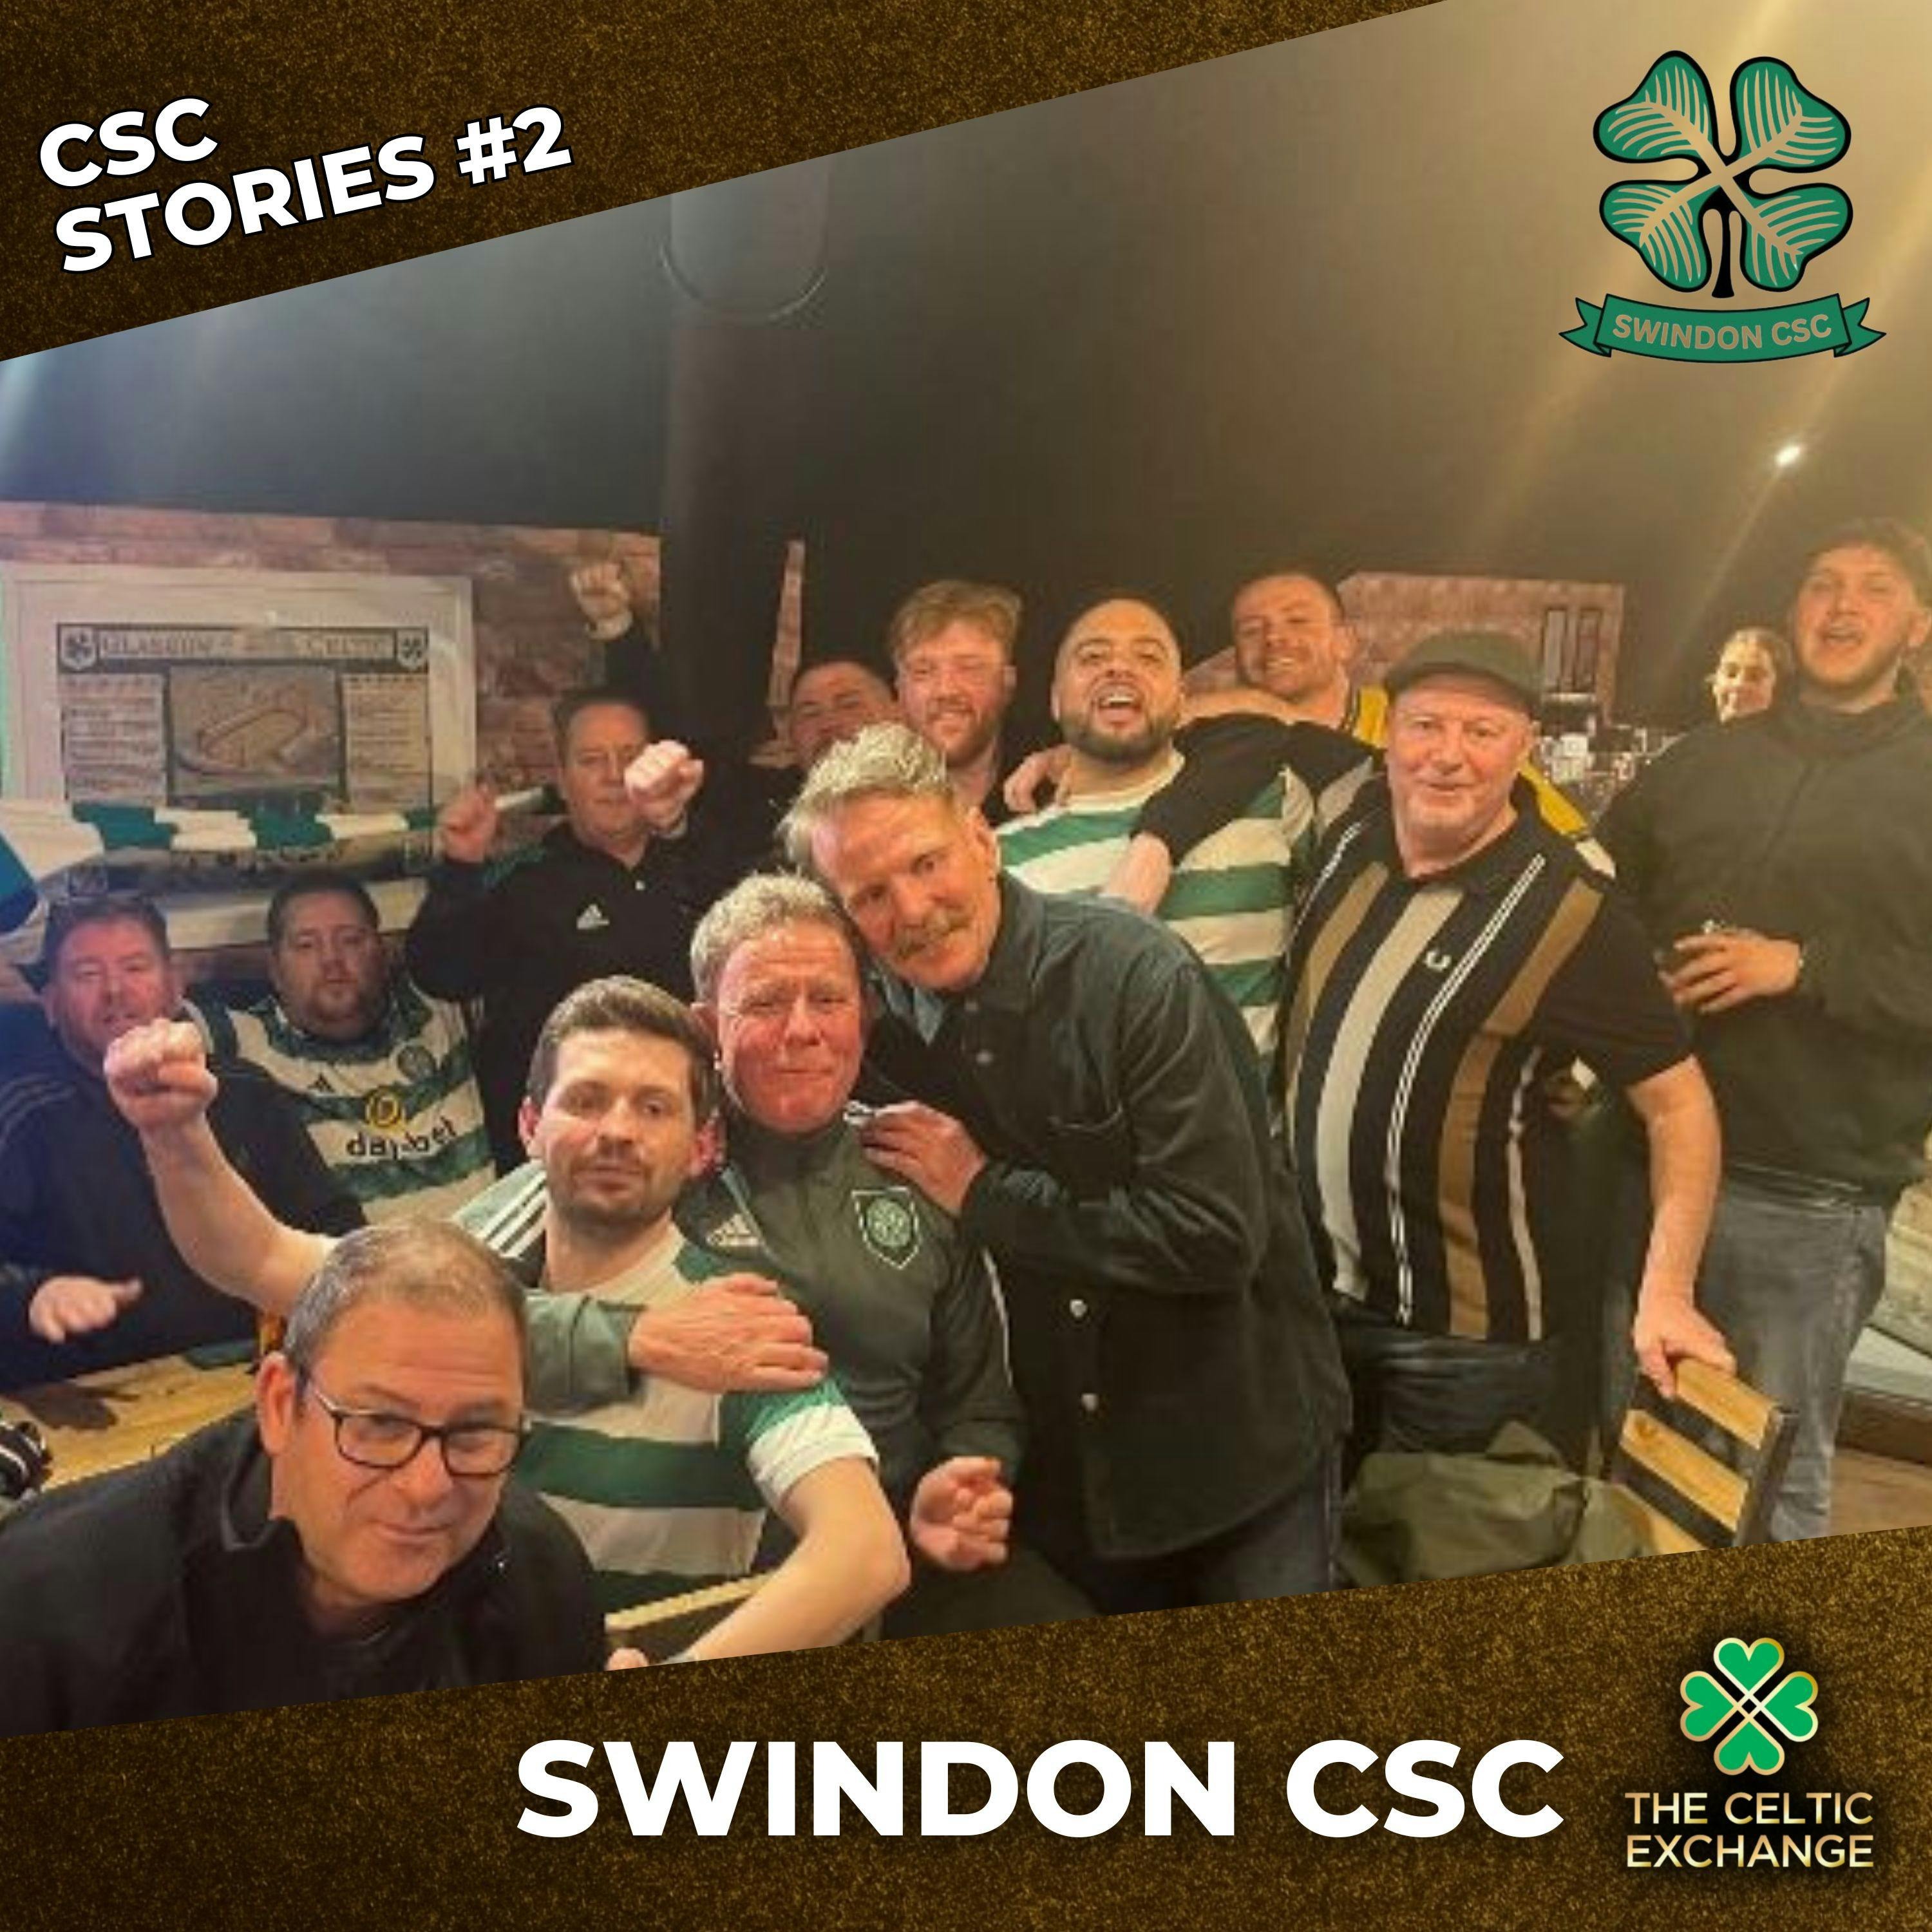 CSC Stories #2 - ”That’s What Celtic Means To Me!” | Swindon CSC 🍀